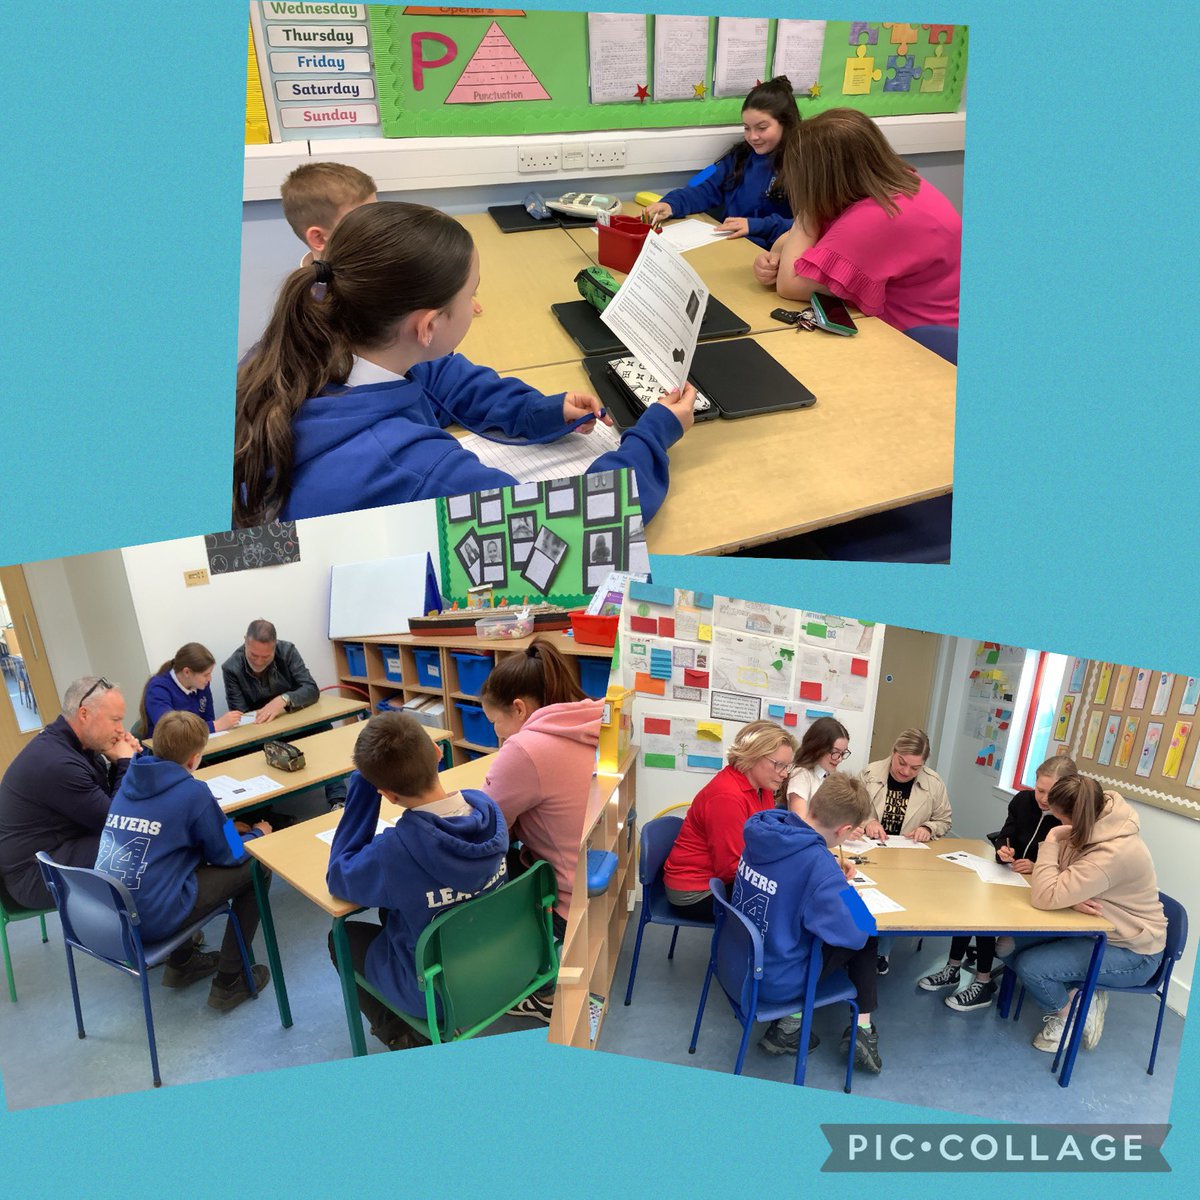 We did a ‘Spot the Silly Word’ #ShortRead this morning with our parents during our #ShareTheLearning time. #ReflectiveReading #Literacy #Reader #Recorder #P7Team @anneglennie 😊